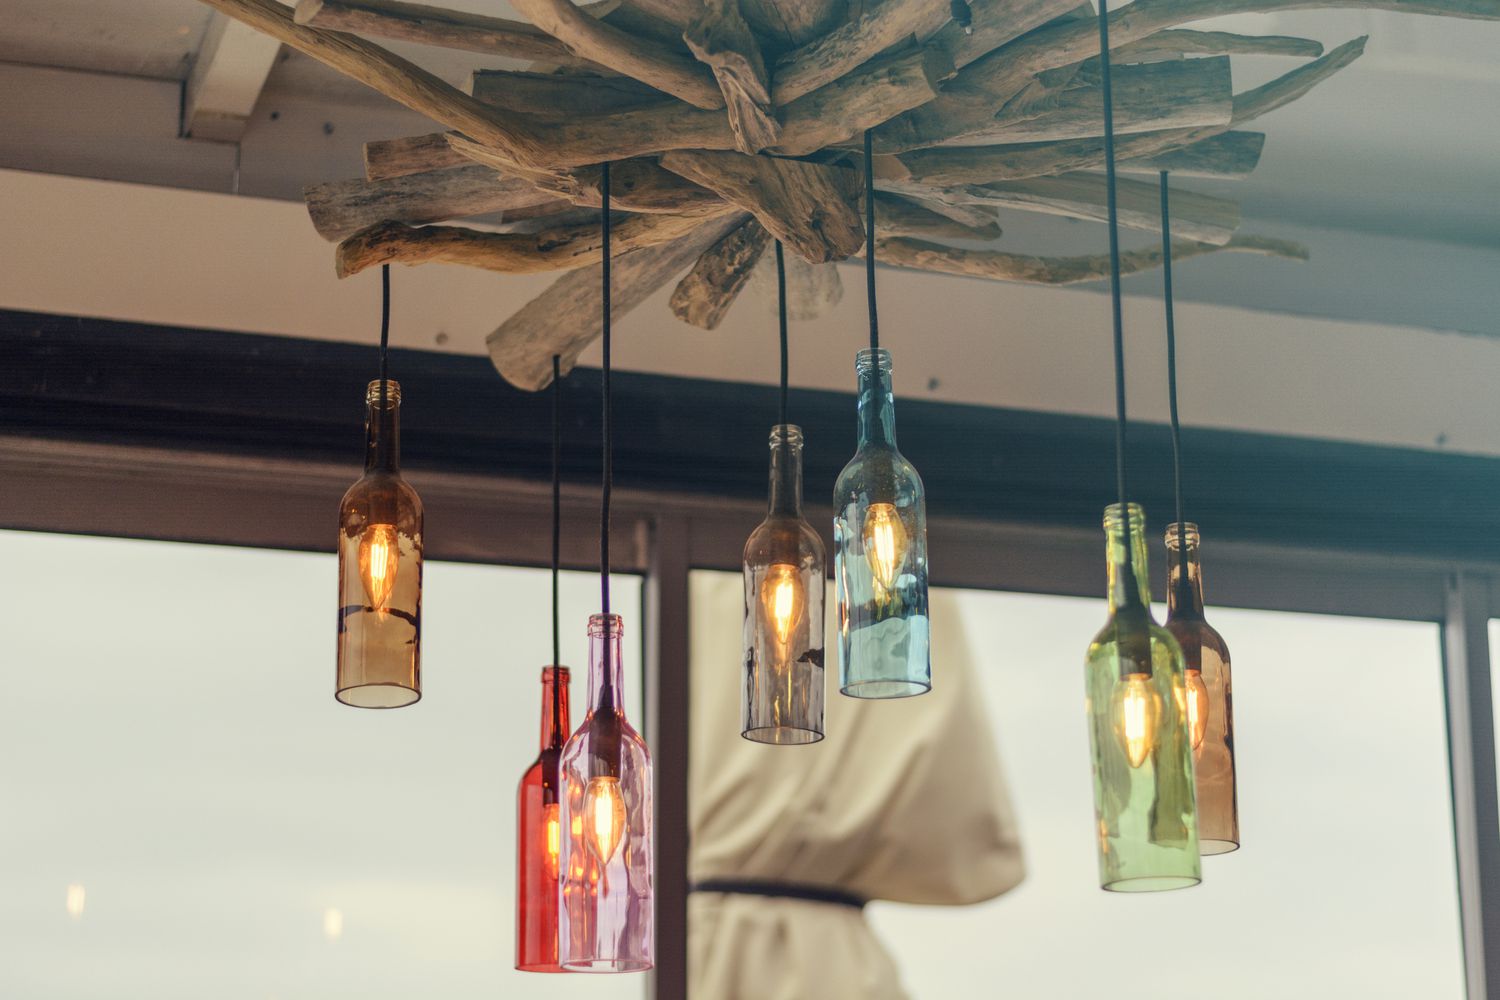 colorful bottles with lightbulbs in them turned into pendant lights hanging from drift wood on the ceiling